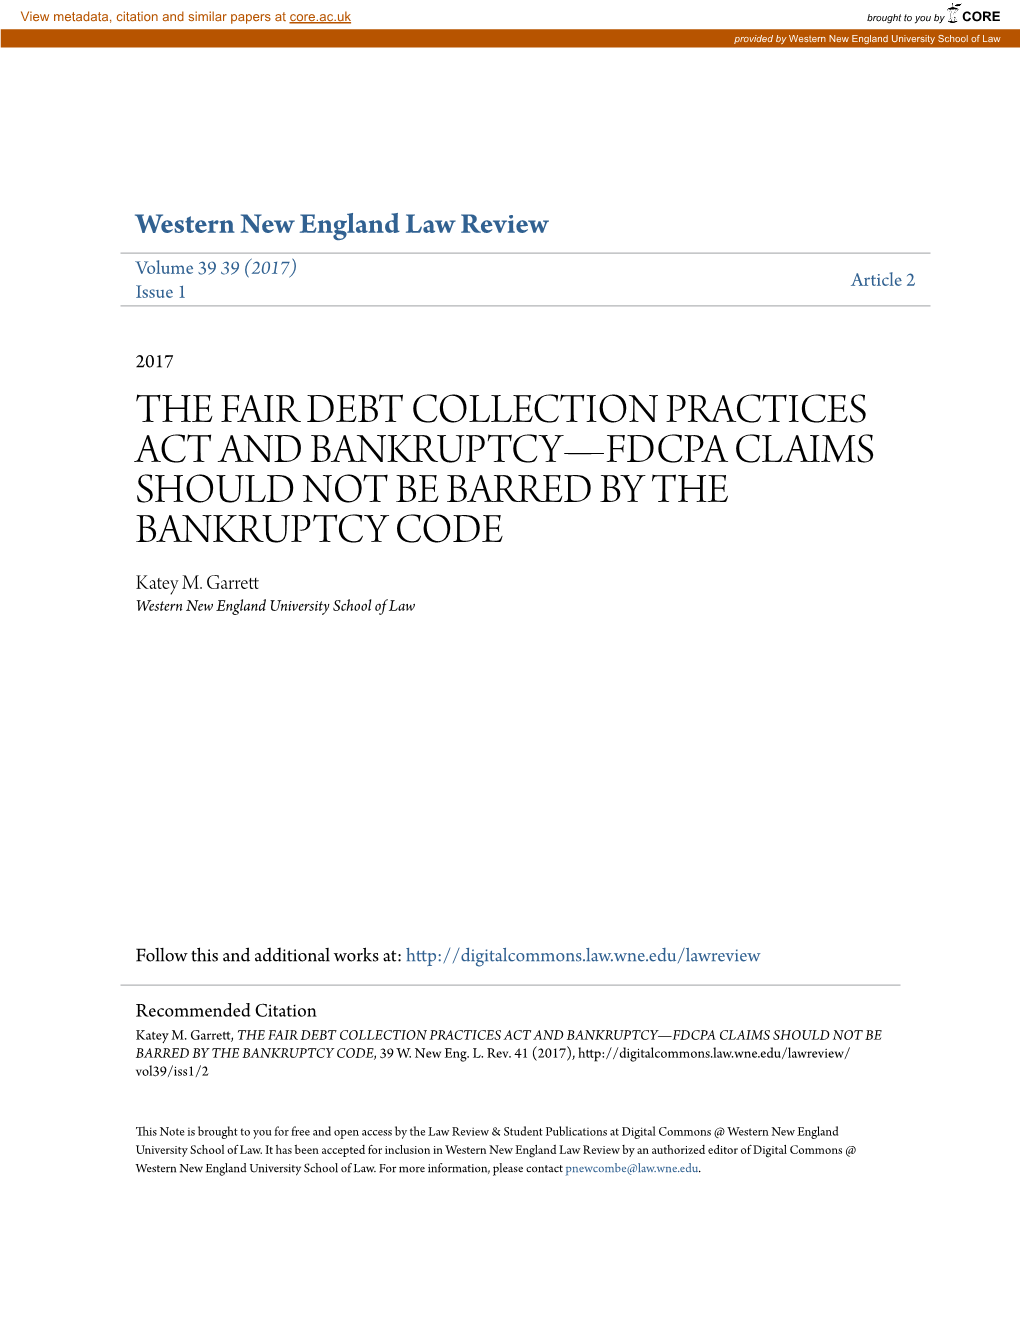 THE FAIR DEBT COLLECTION PRACTICES ACT and BANKRUPTCY—FDCPA CLAIMS SHOULD NOT BE BARRED by the BANKRUPTCY CODE Katey M